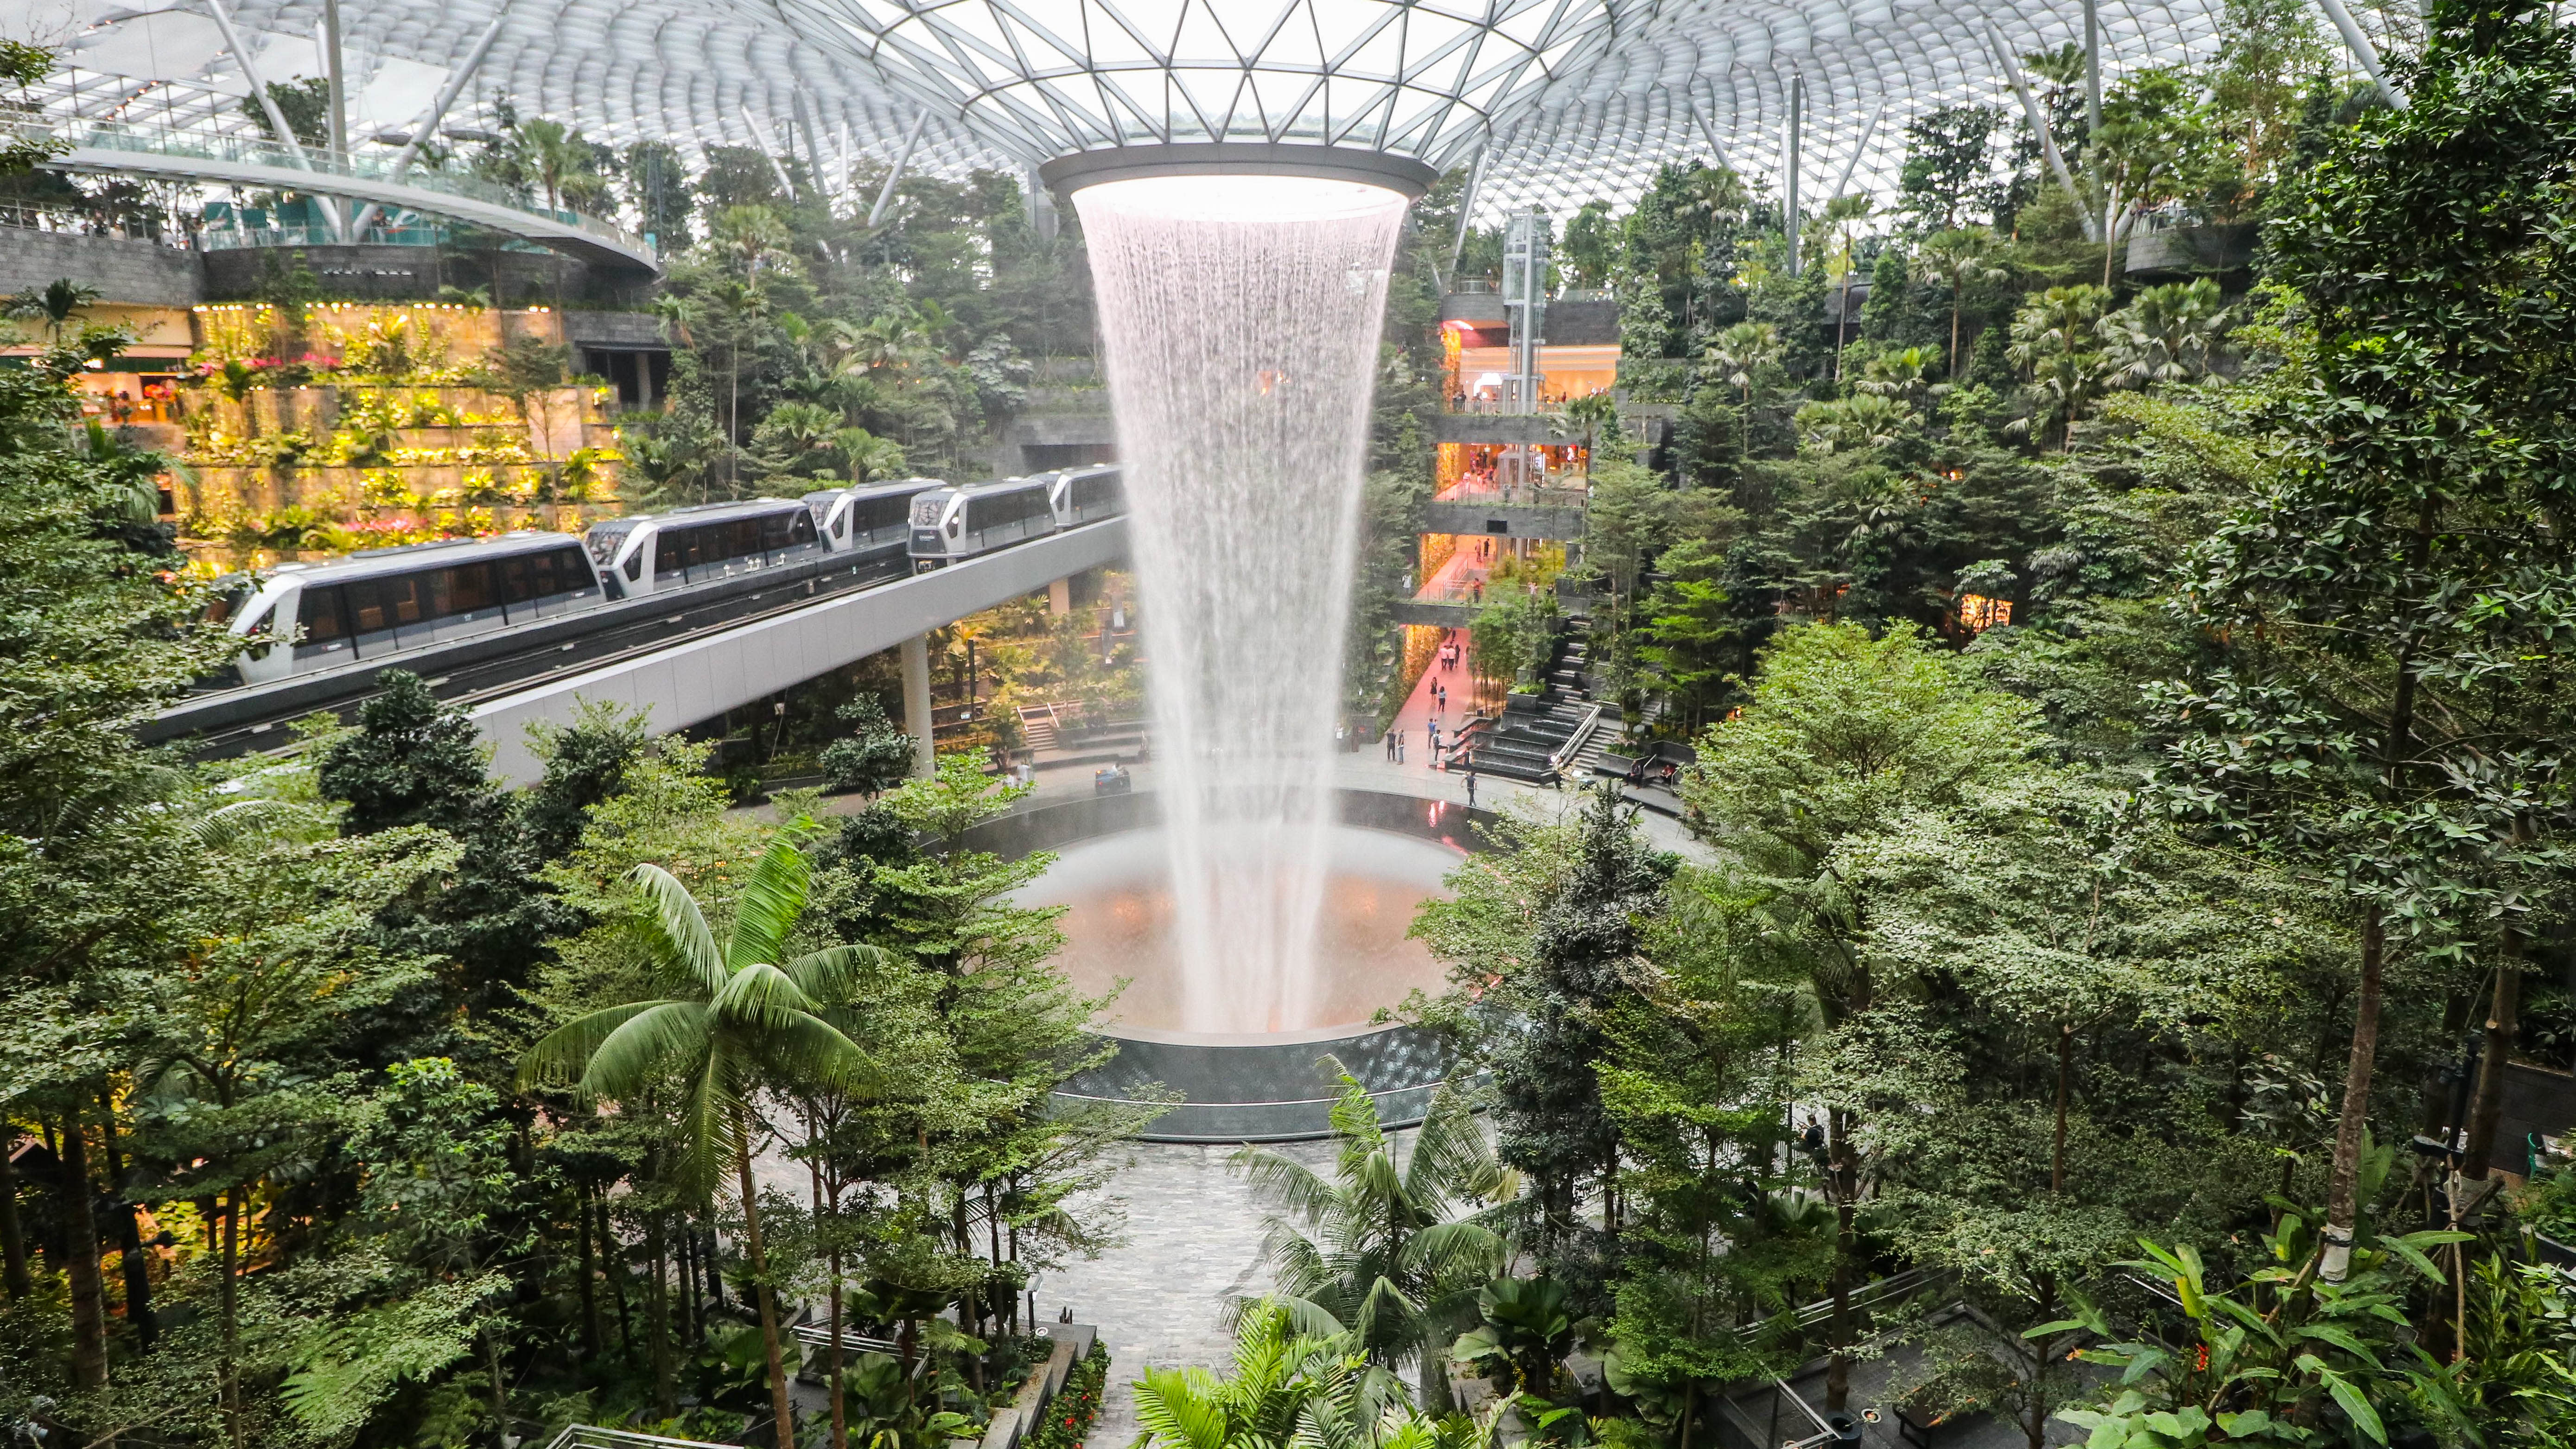 Singapore's Changi bets on $1.3bn mall as Asian airports up game